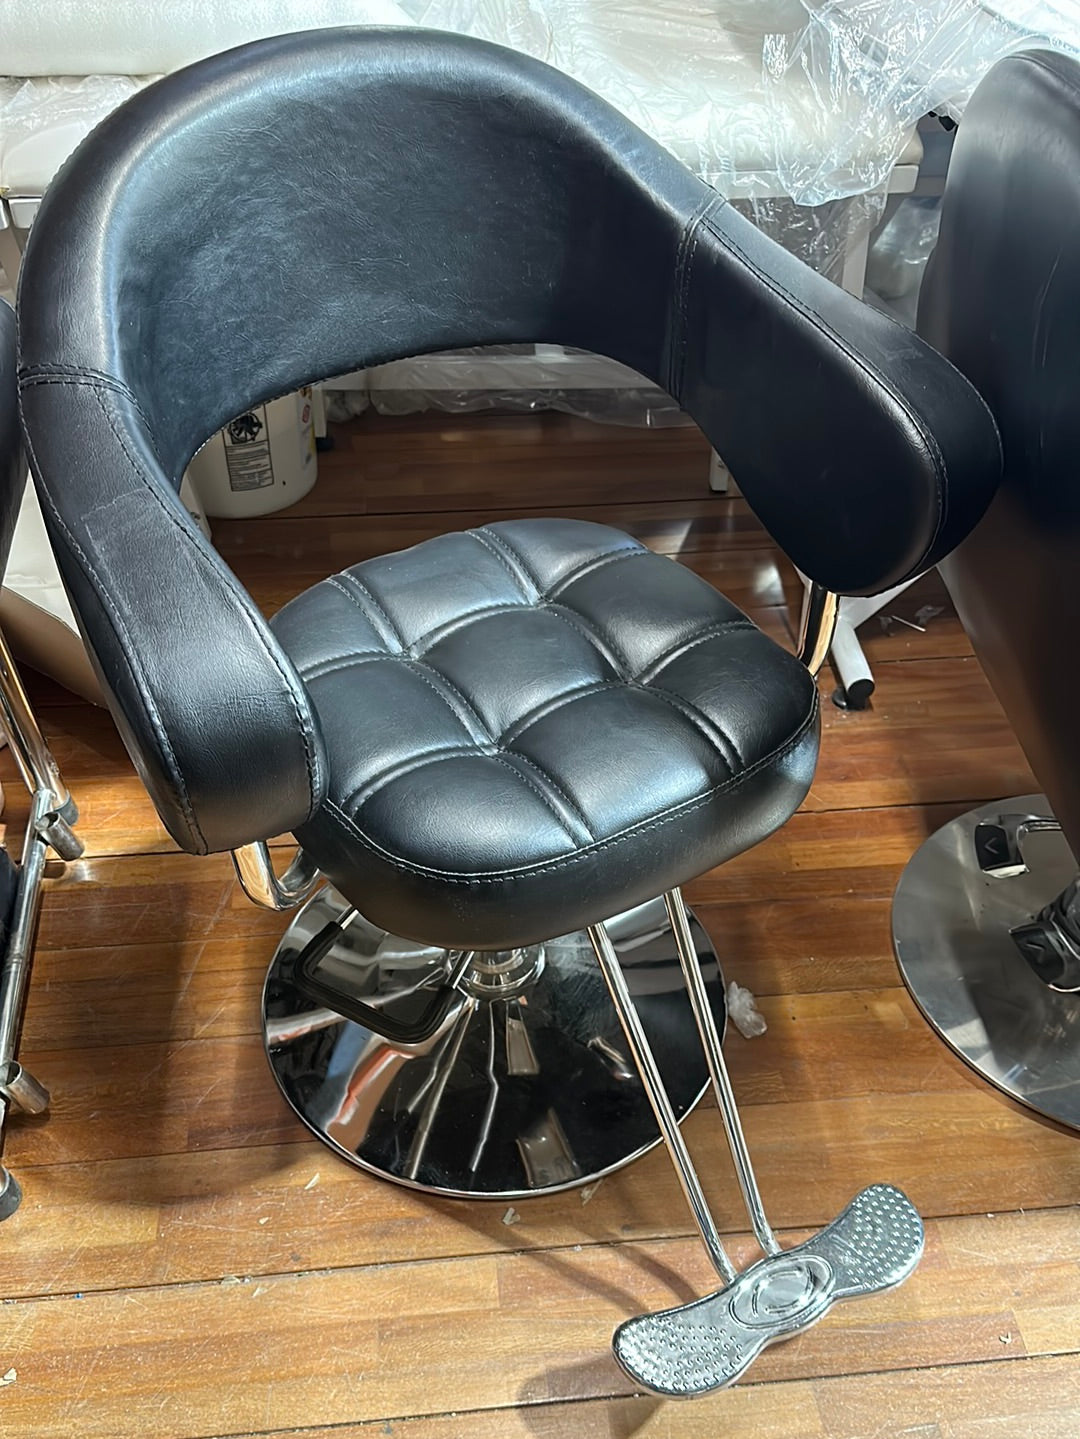 CHI BC BARBER CHAIR W/ METAL FOOTREST